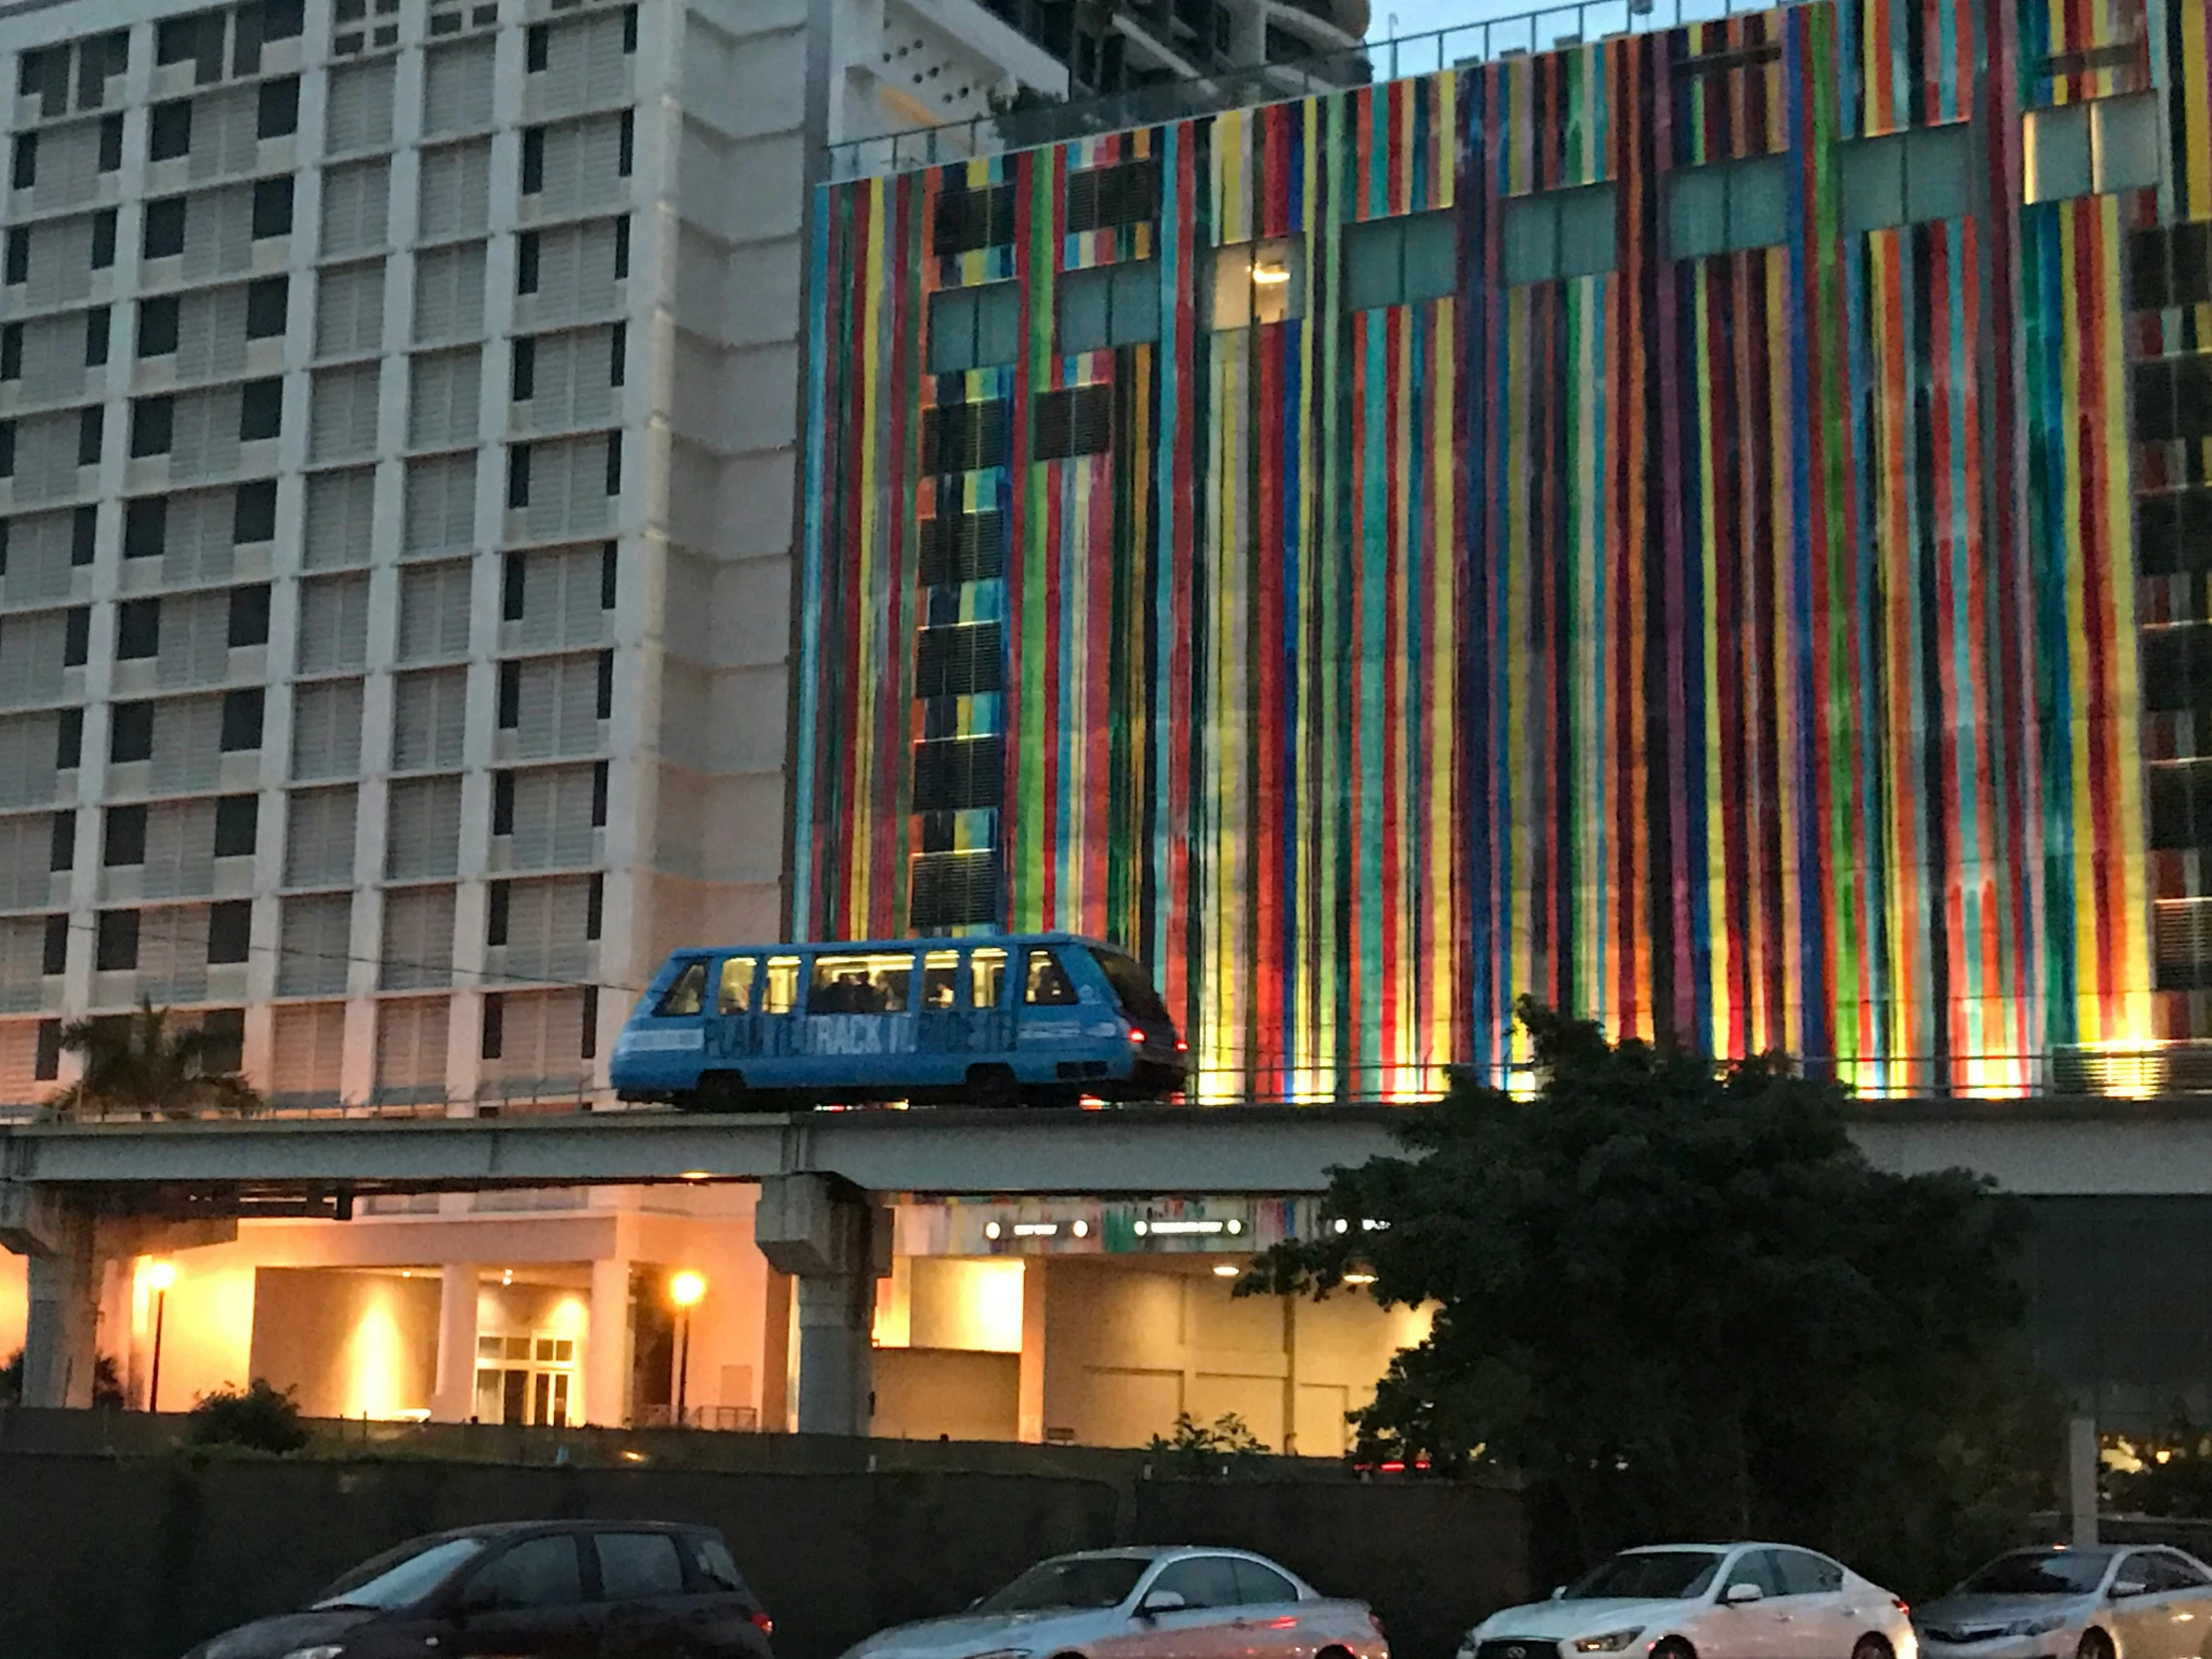 a large tall building with a multicolored covering over the top